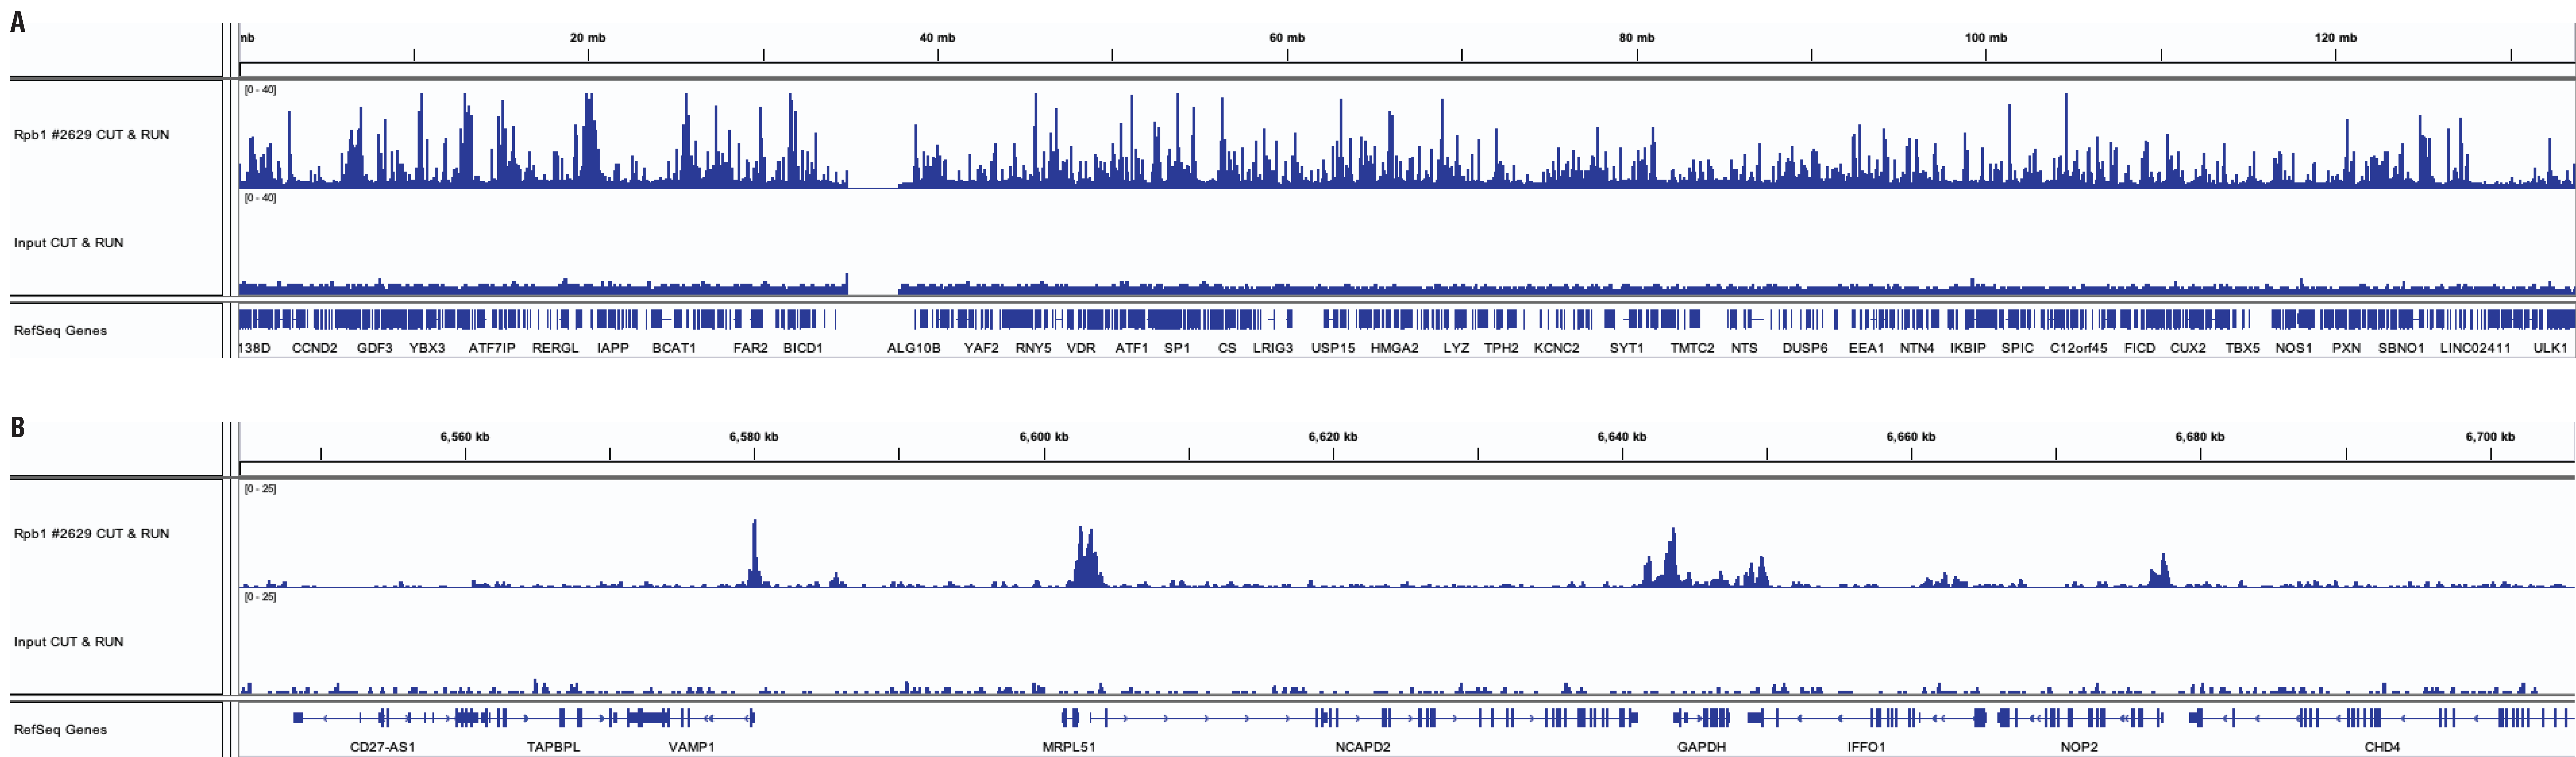 Rpb1 CTD sequencing results for CUT&RUN and ChIP